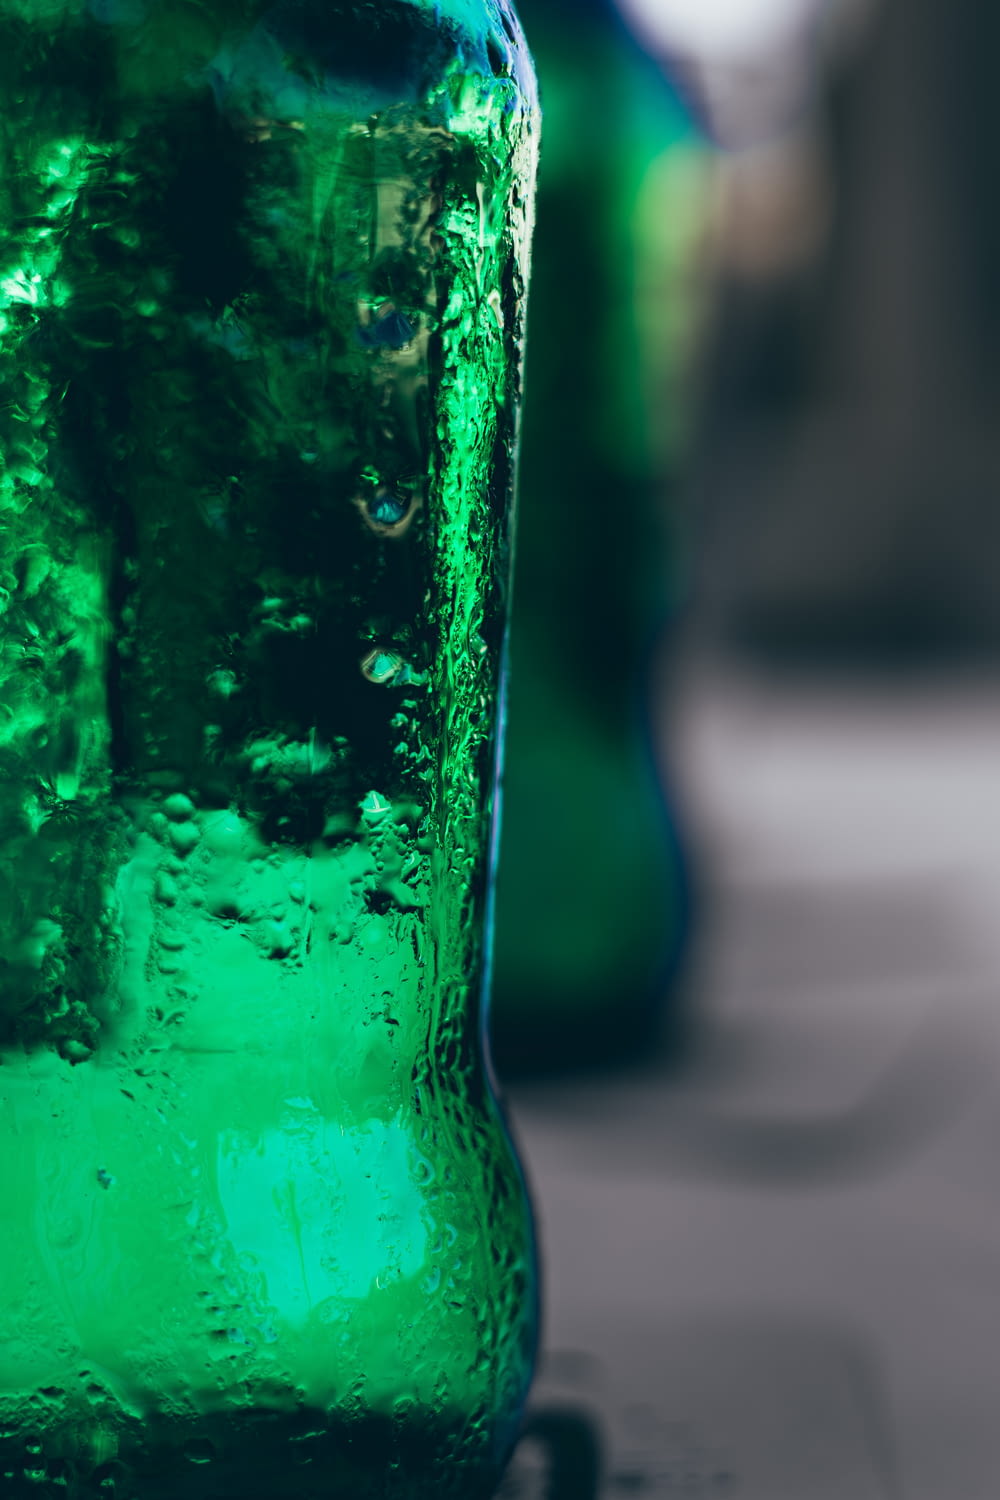 a close up of a green soda bottle